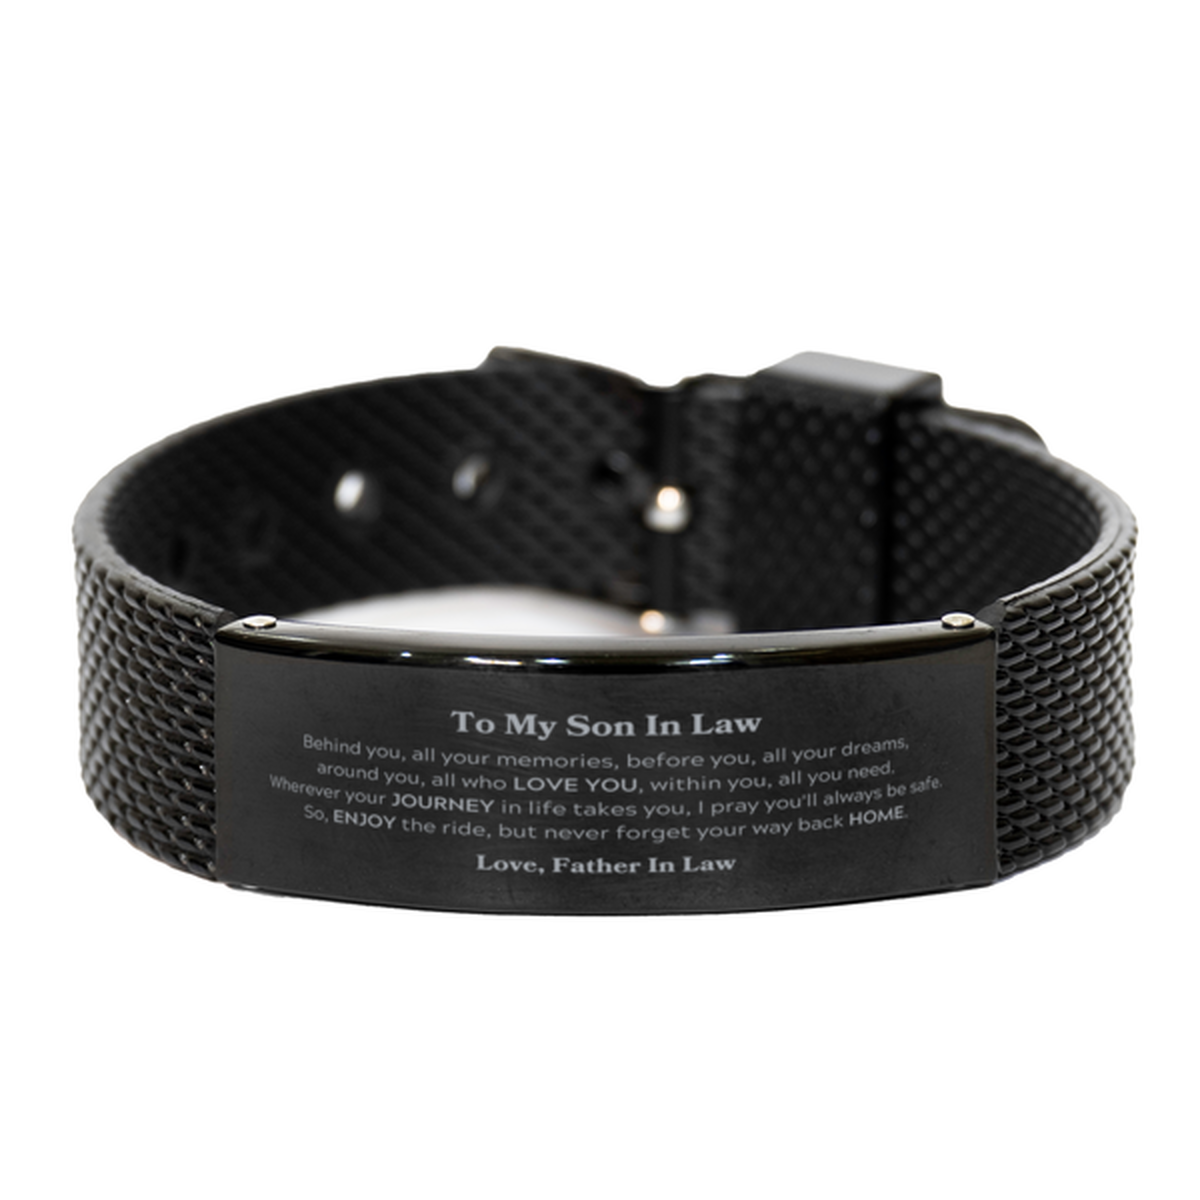 To My Son In Law Graduation Gifts from Father In Law, Son In Law Black Shark Mesh Bracelet Christmas Birthday Gifts for Son In Law Behind you, all your memories, before you, all your dreams. Love, Father In Law